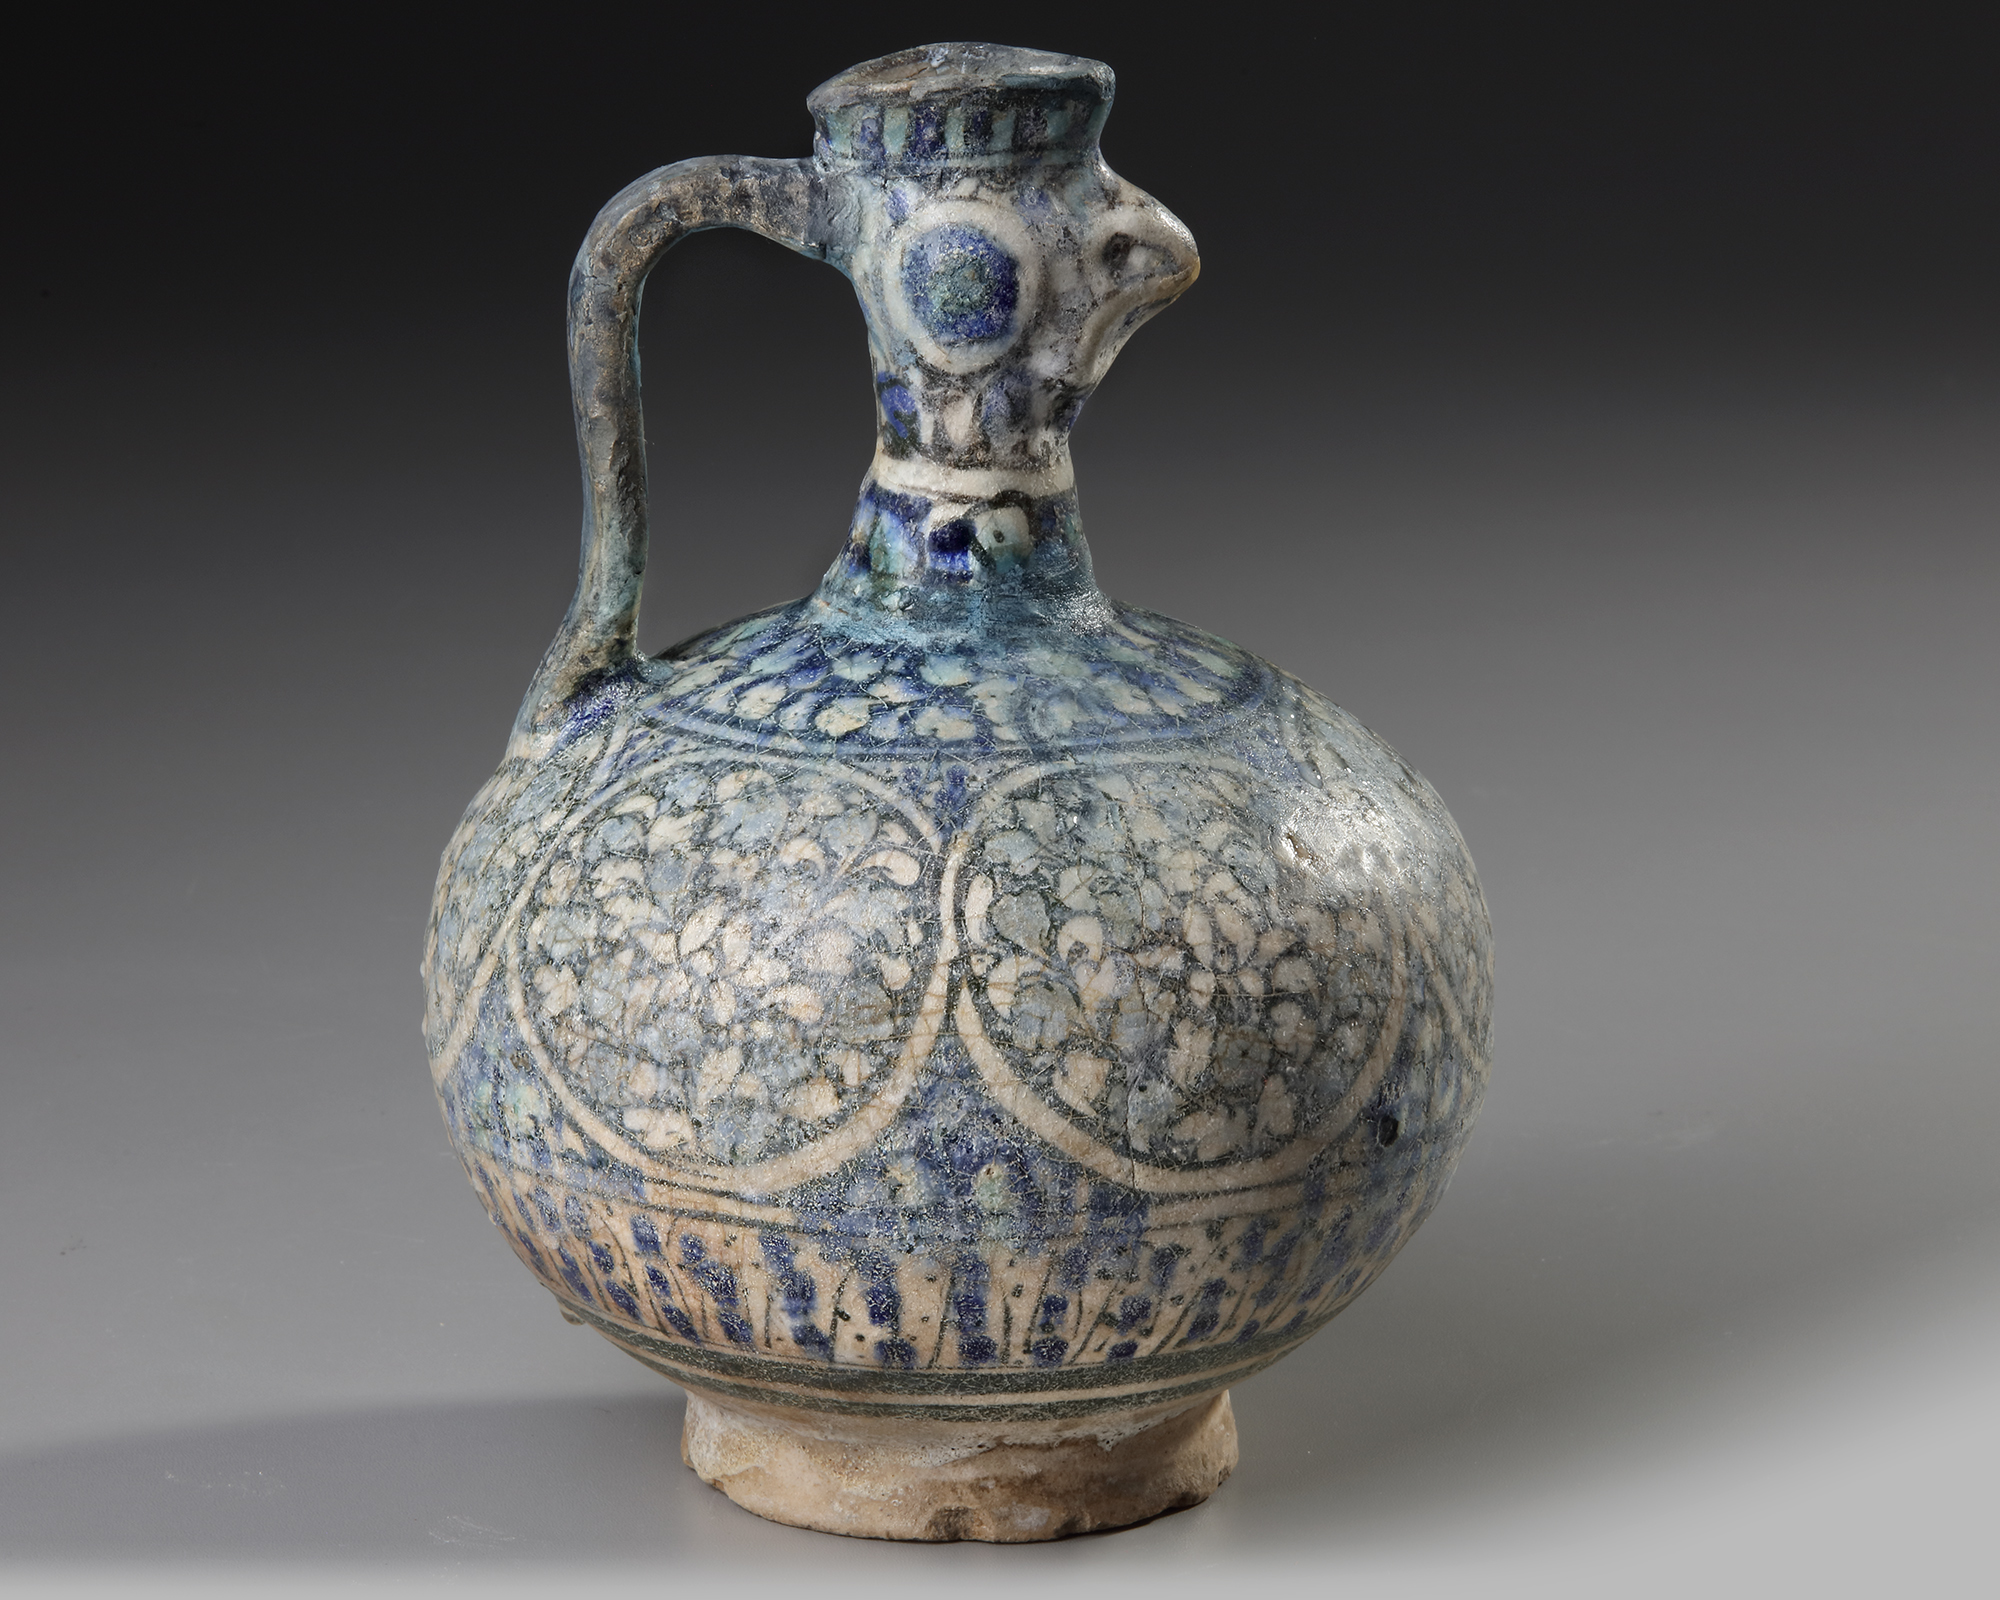 A SULTANABAD POTTERY COCKEREL-HEAD POTTERY EWER, PERSIA, 12TH CENTURY - Image 3 of 8